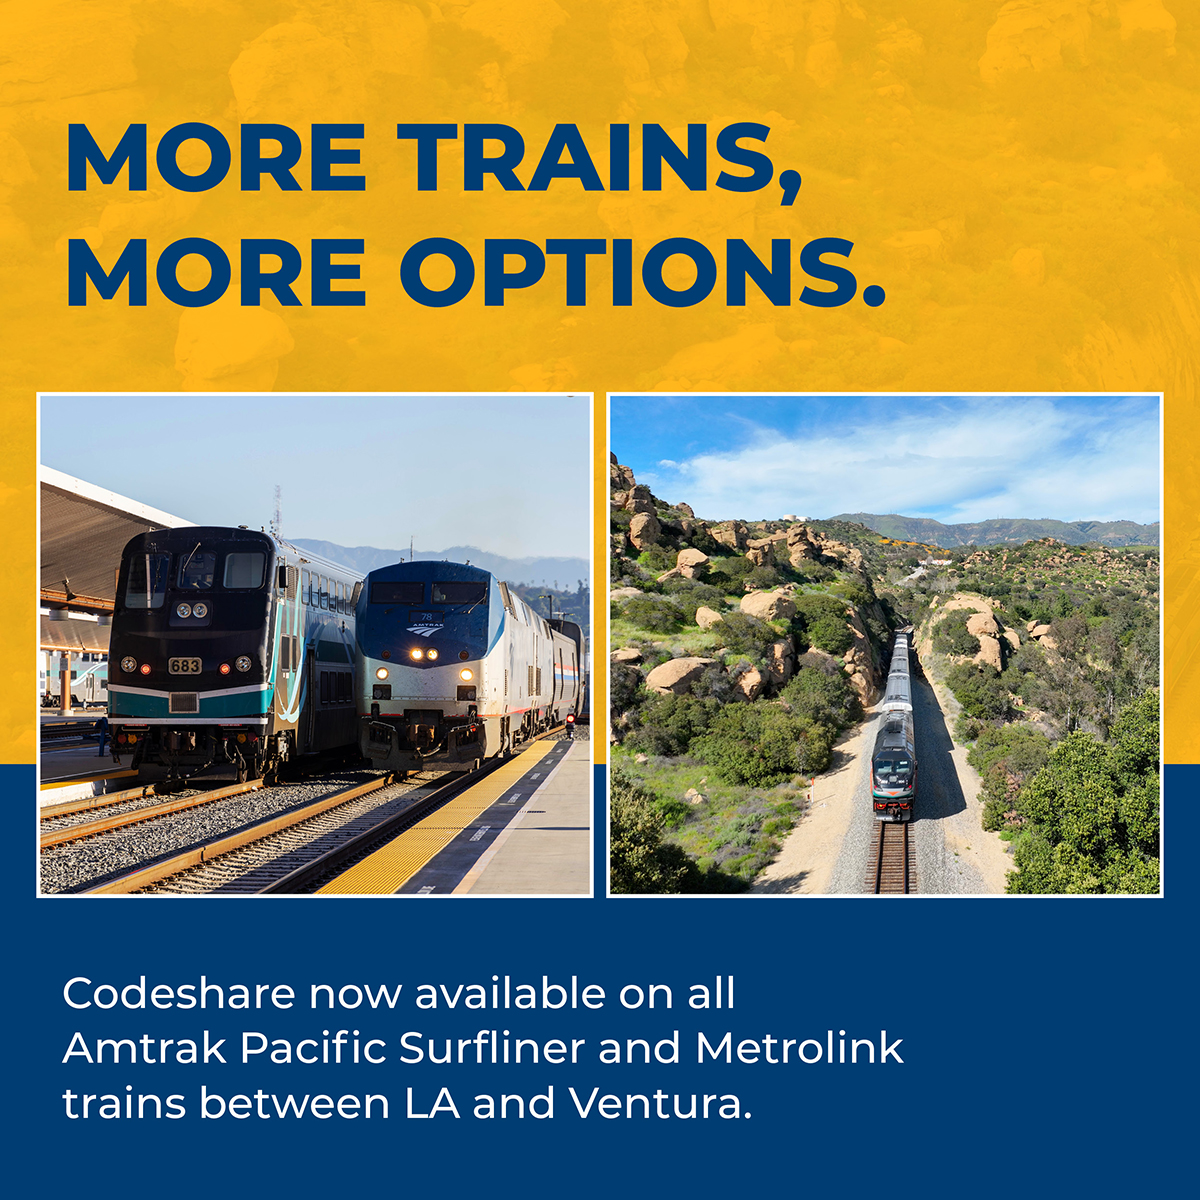 ALL Metrolink ticketholders can take any Amtrak Pacific Surfliner train between Los Angeles and Ventura, seven days a week! Travel at no extra charge within the station pairs on your ticket. #takethetrain Learn More: metrol.ink/3SEMtQD